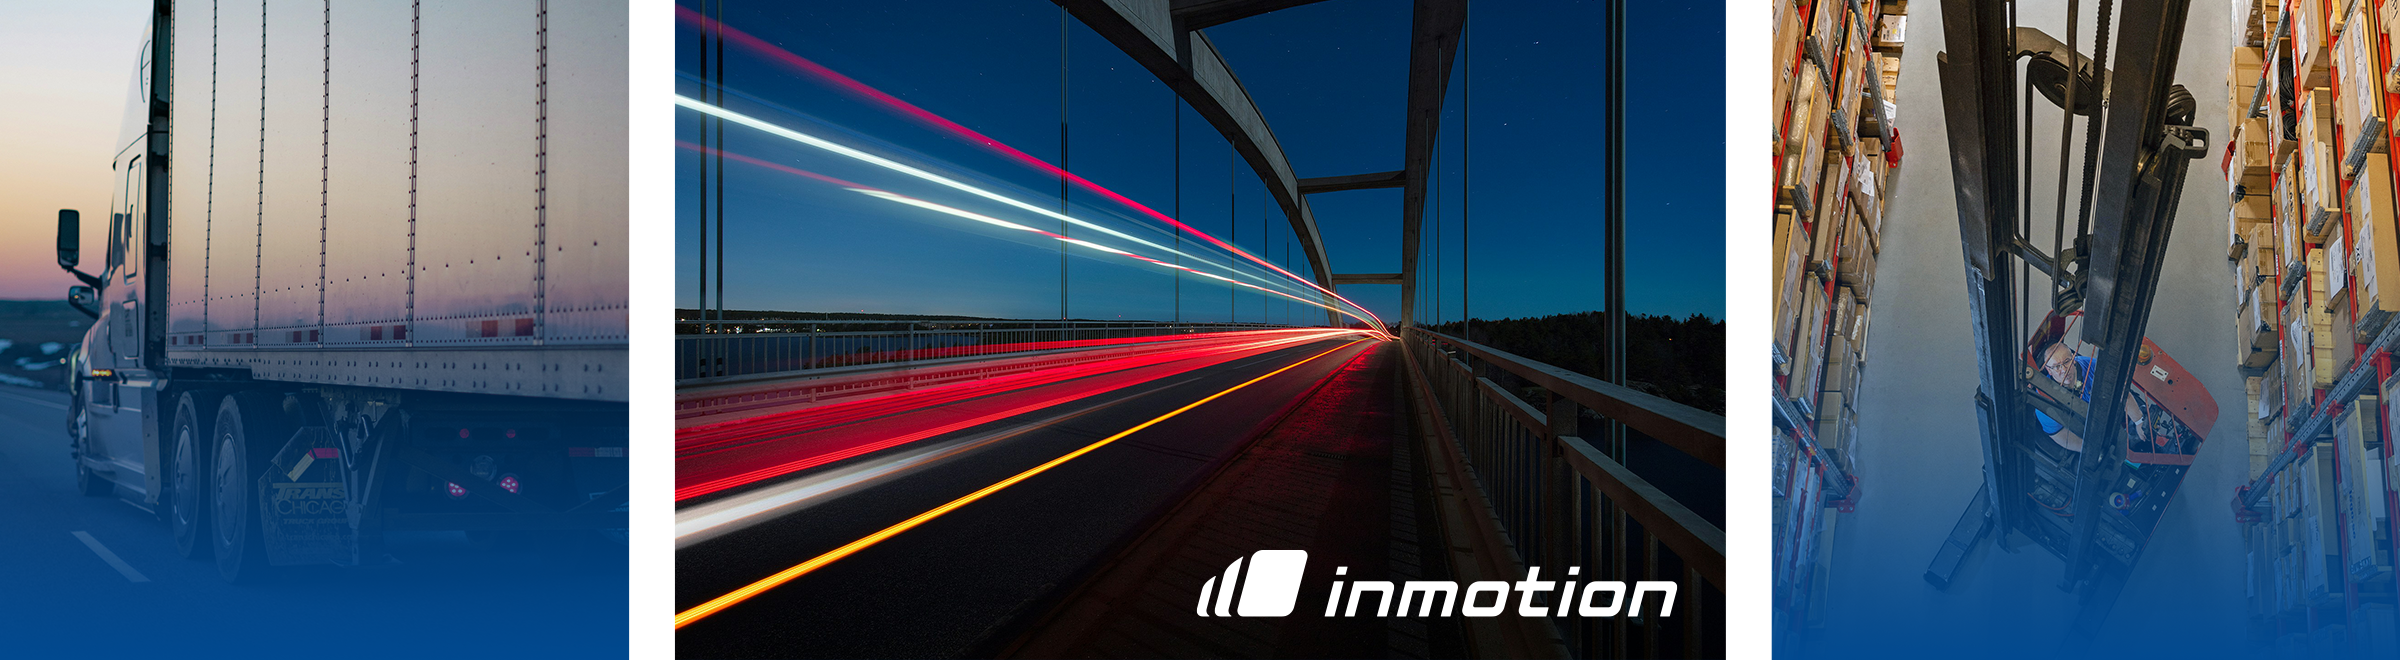 Kitron and Inmotion: Powering the Future of Electric Mobility